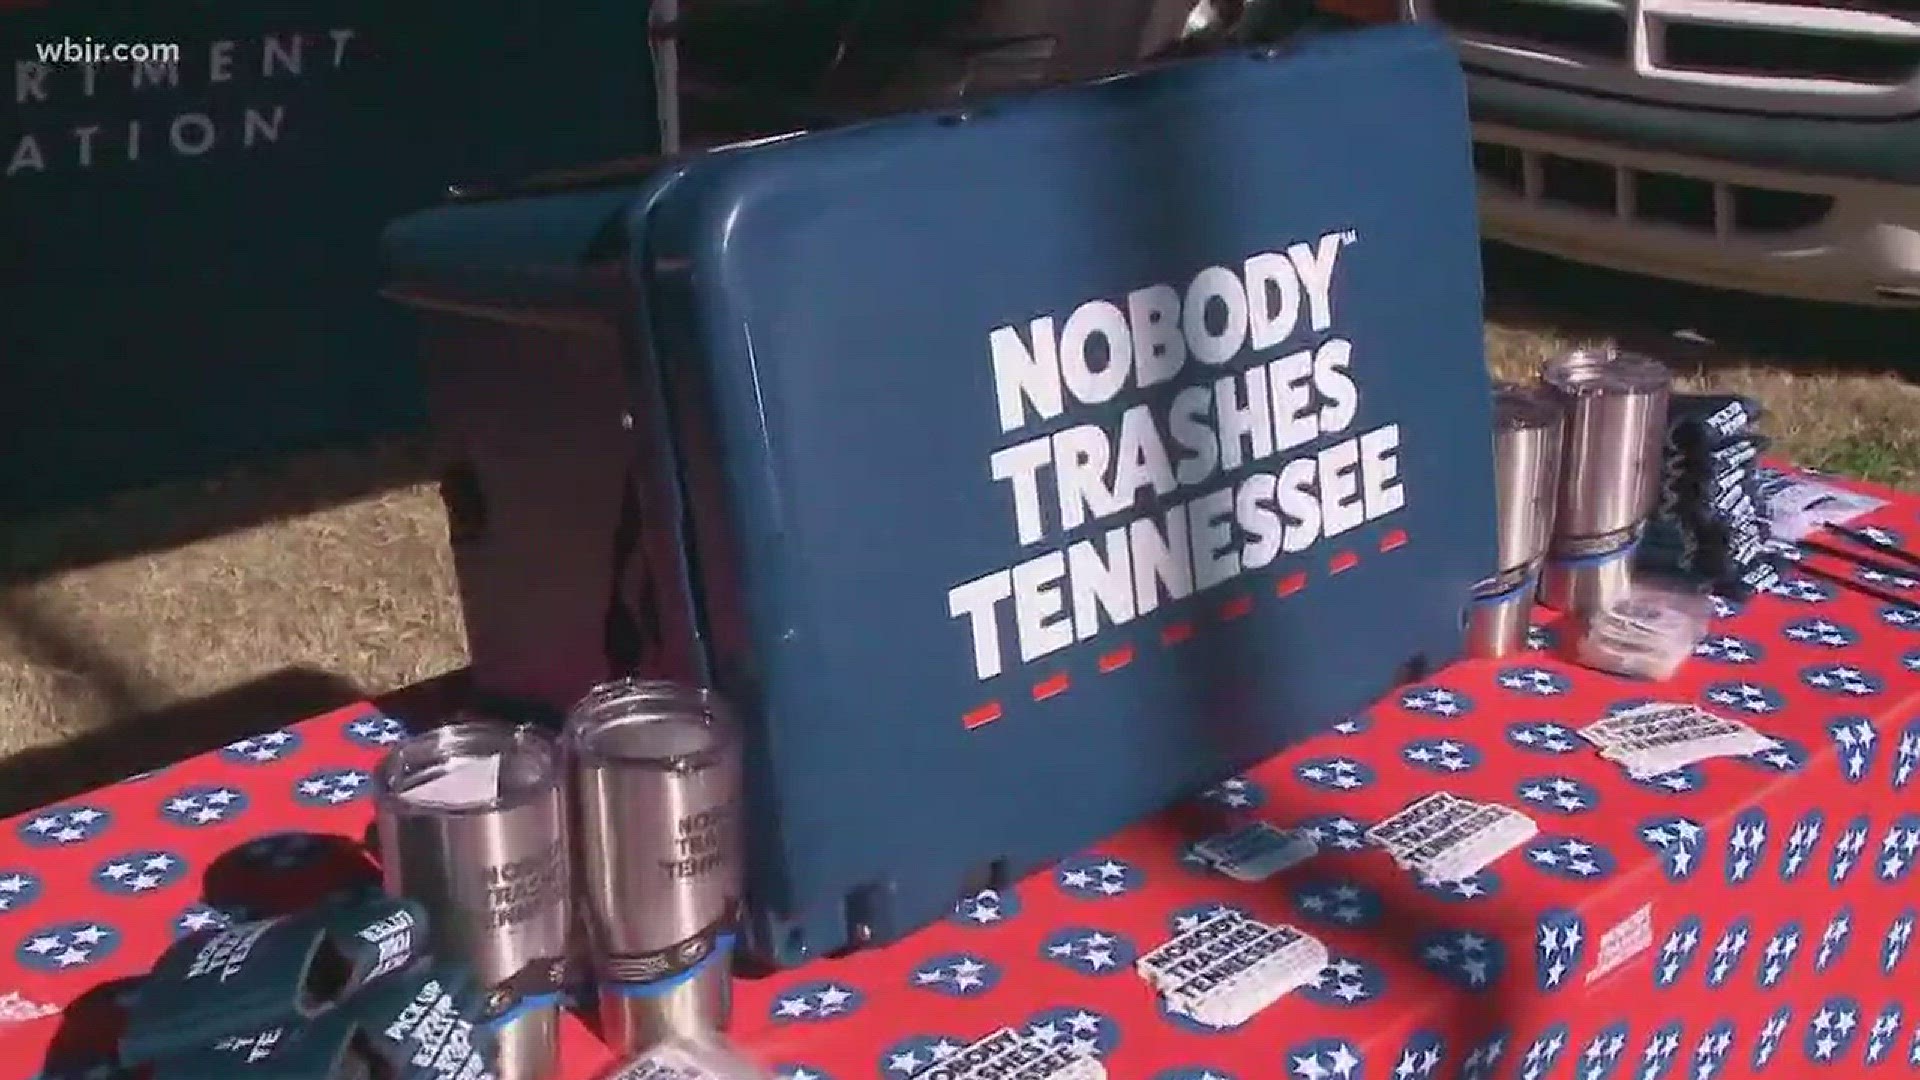 The Nobody Trashes Tennessee Clean Team will be on campus near Neyland Stadium Saturday